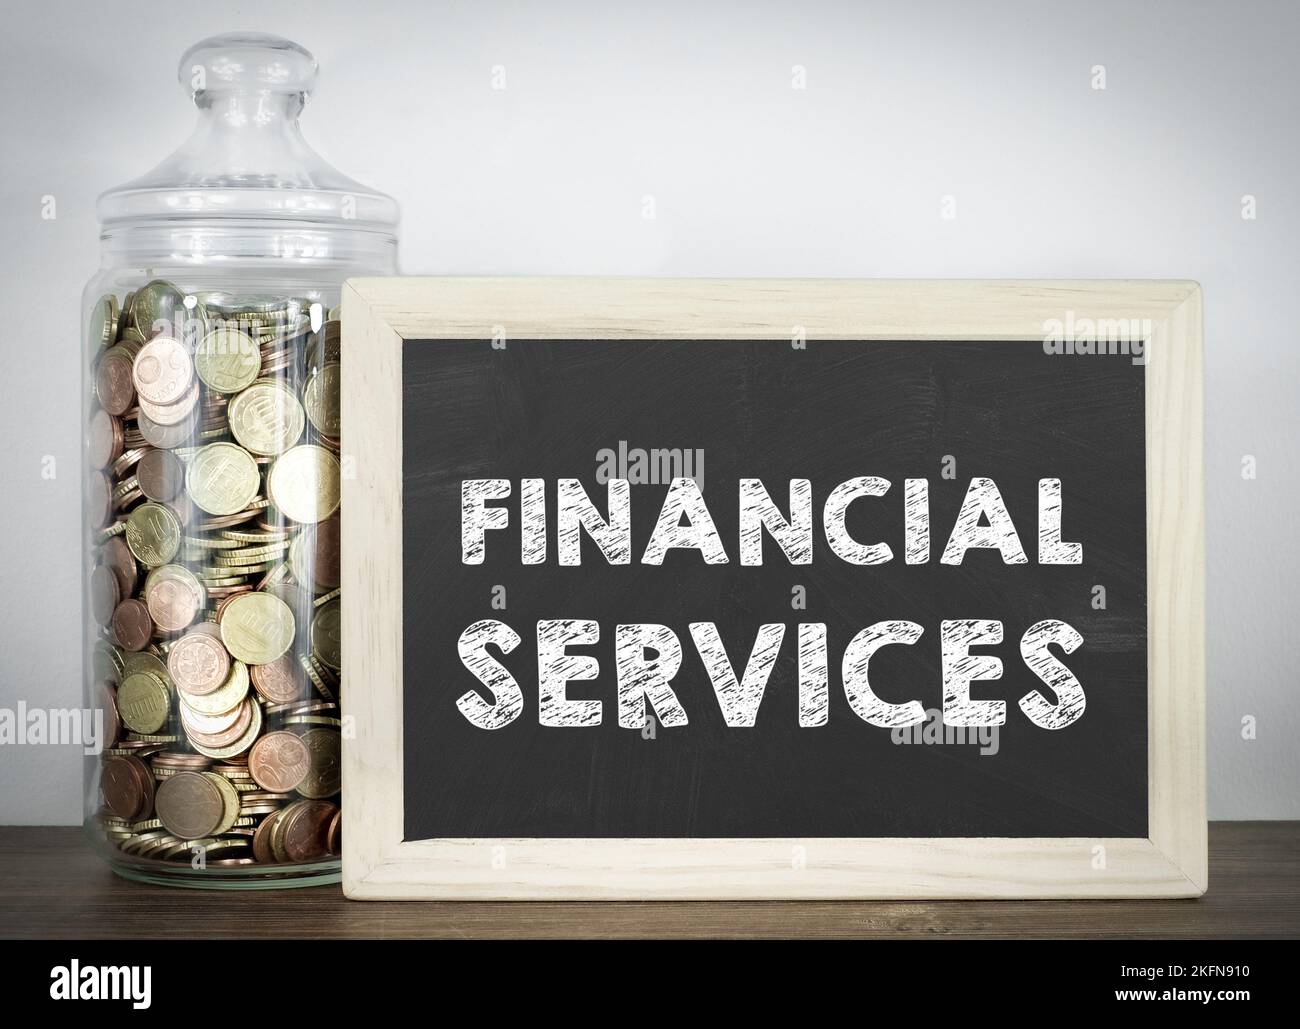 Financial Services Stock Photo